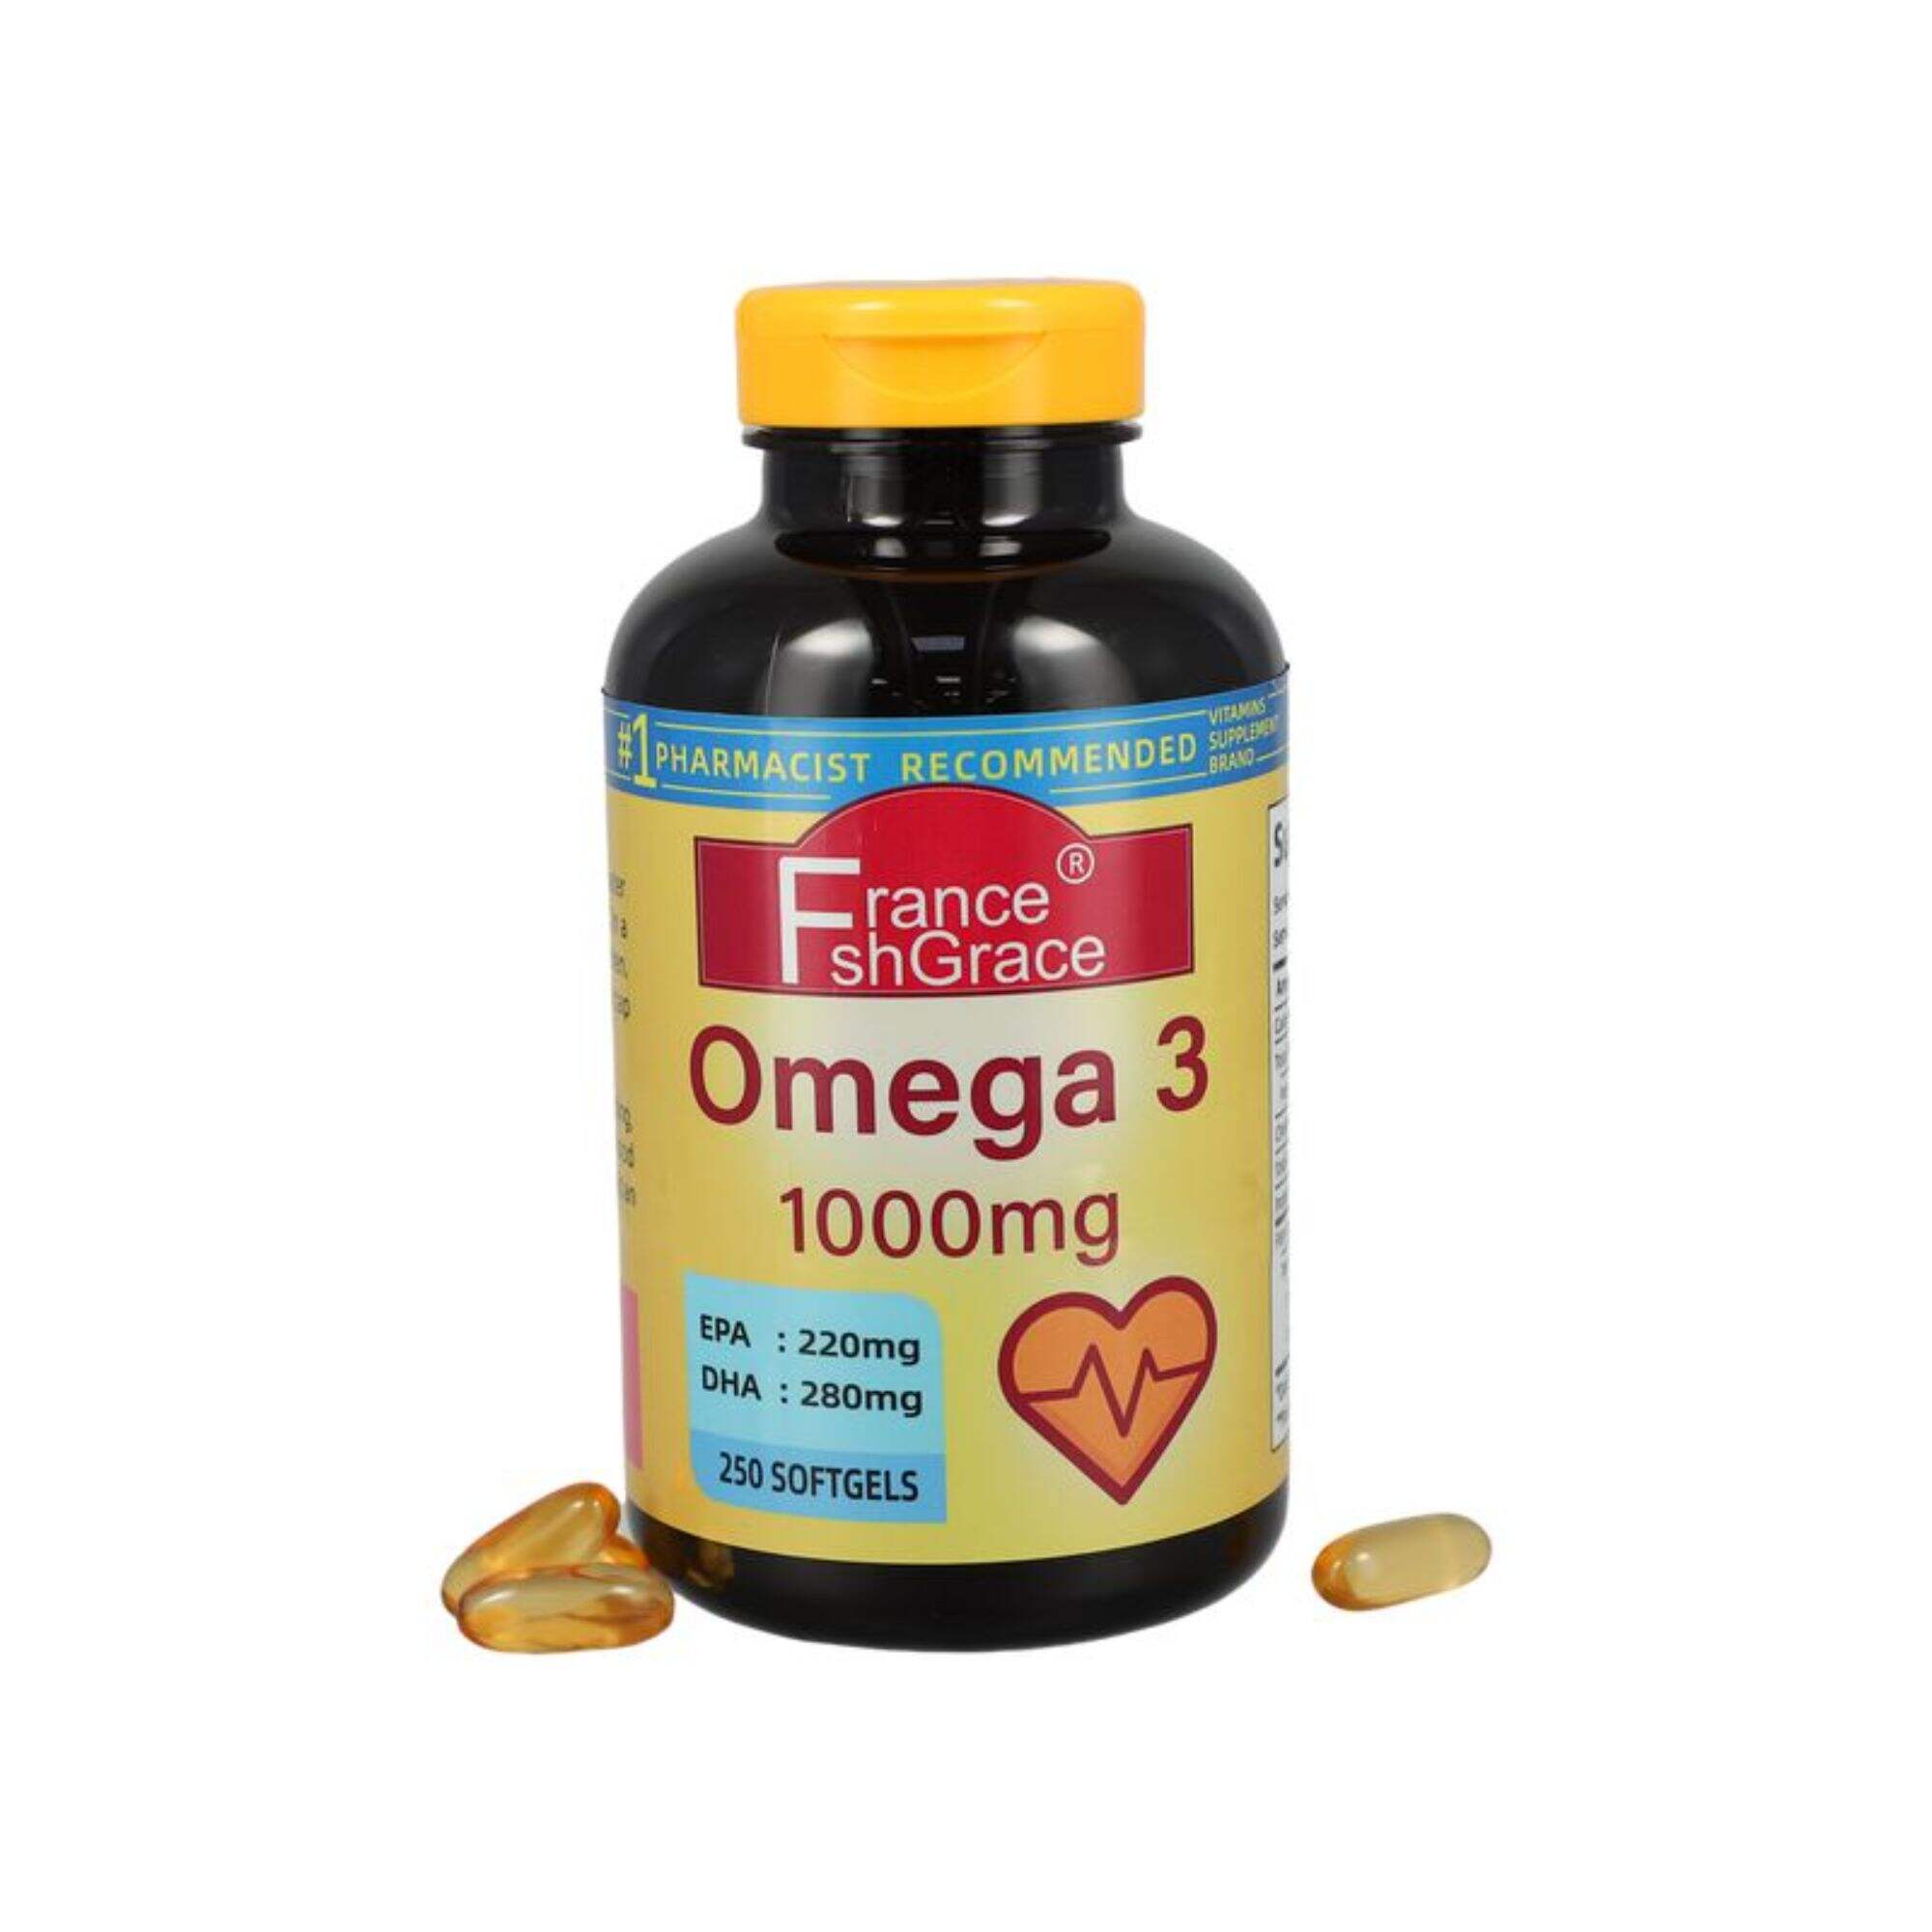 Fish Oil 1000 mg, 250 Softgels Value Size, Fish Oil Omega 3 Supplement For Heart Health